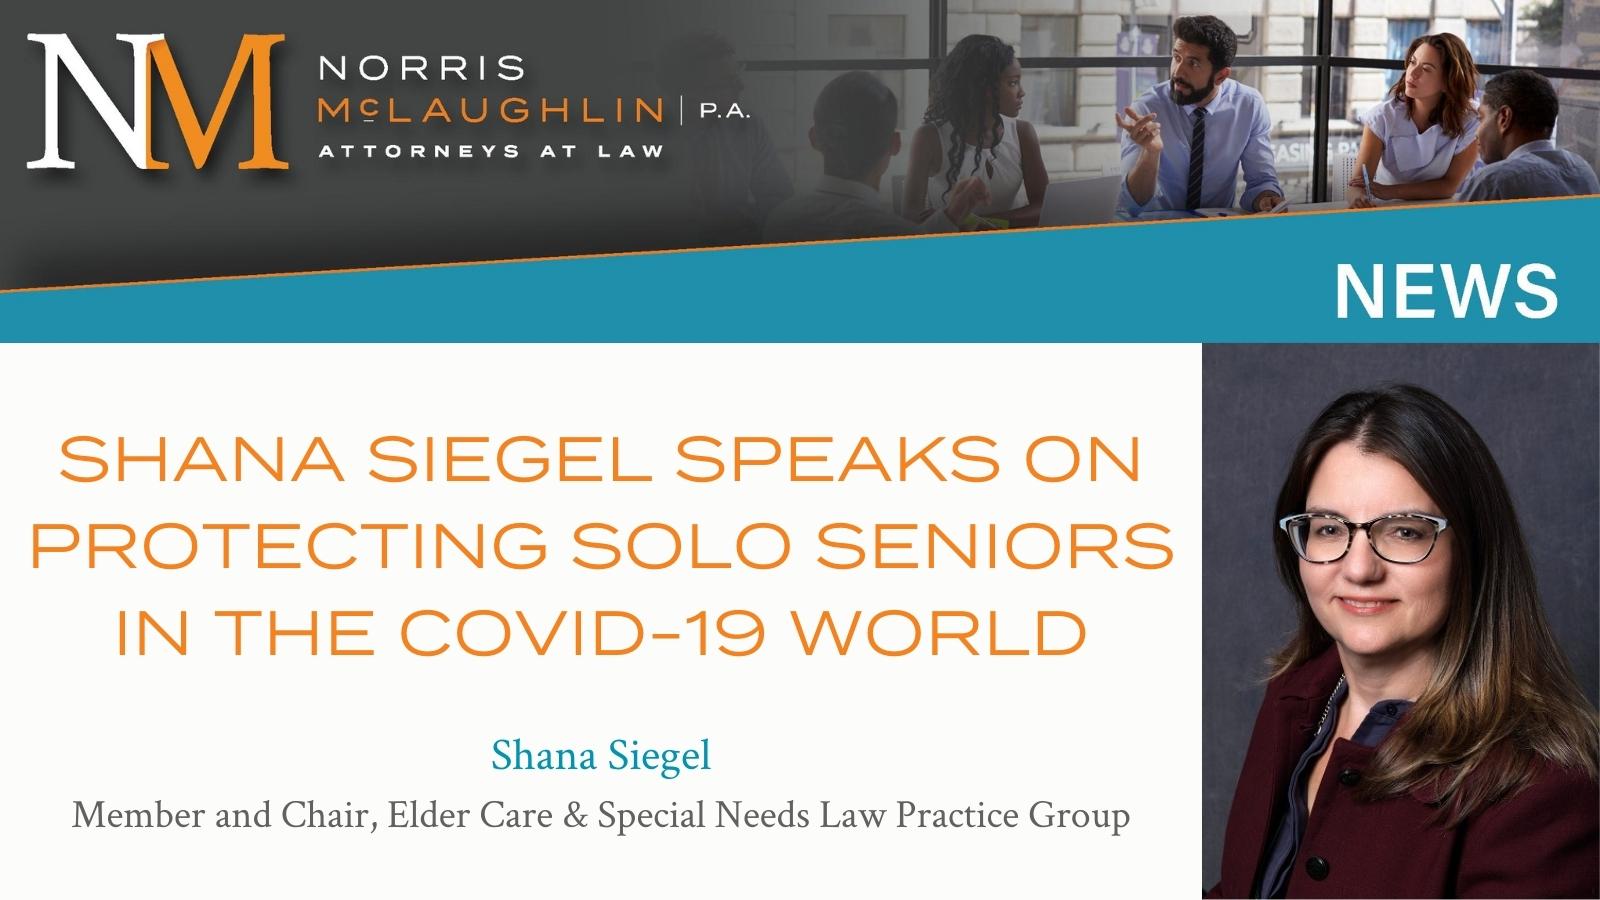 Lunch & Learn: Protecting Solo Seniors in the COVID-19 World